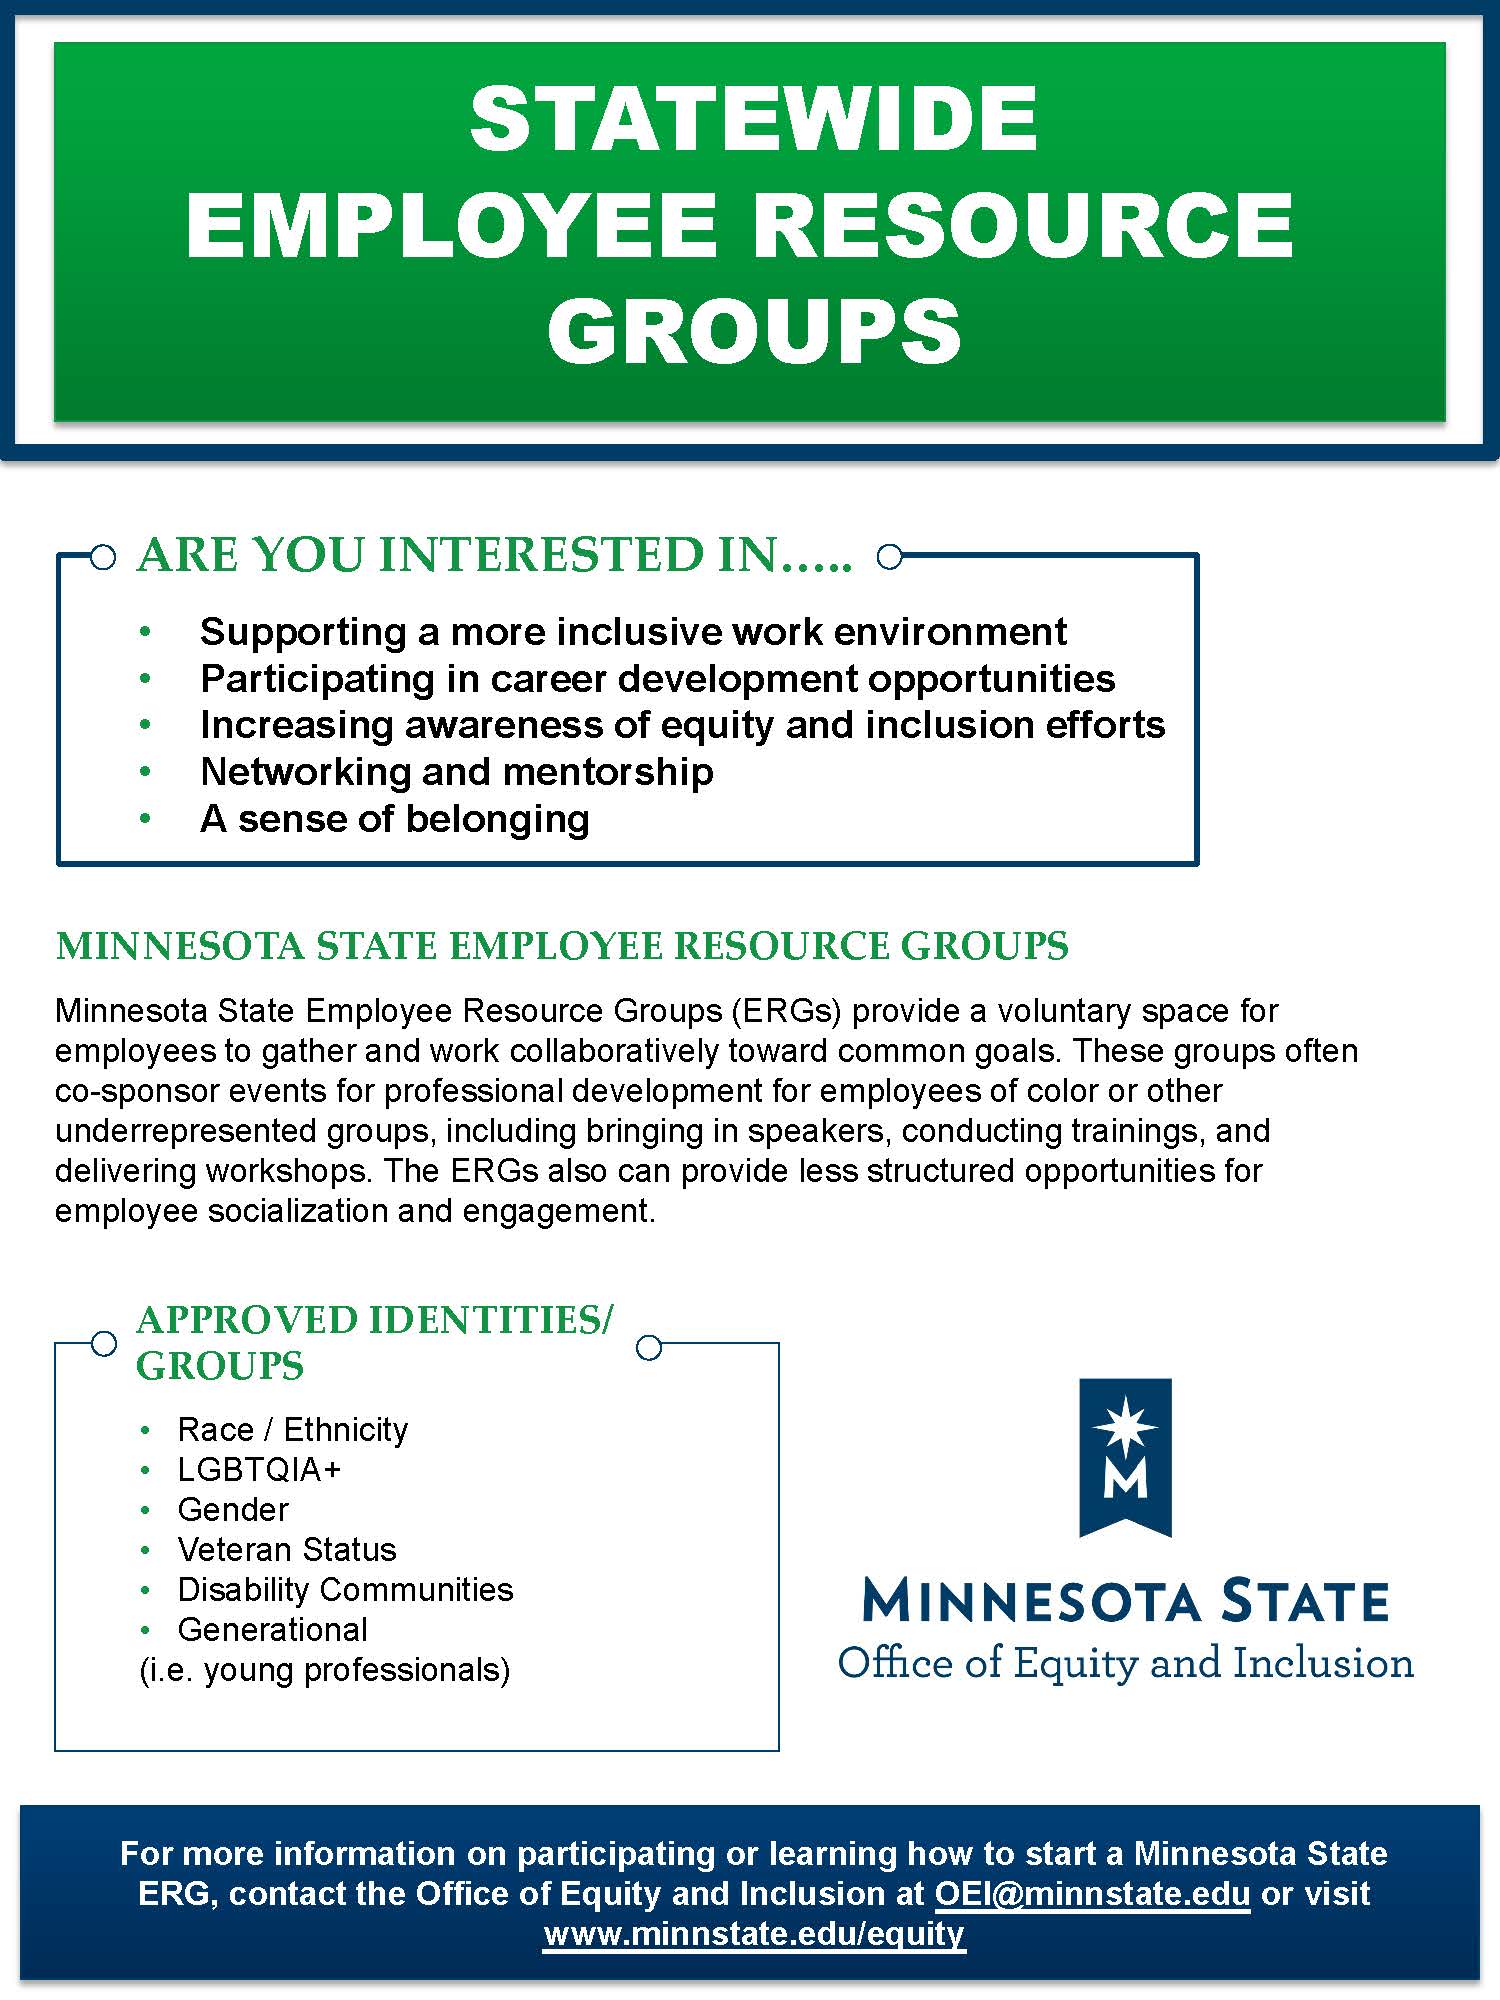 Statewide ERG Poster